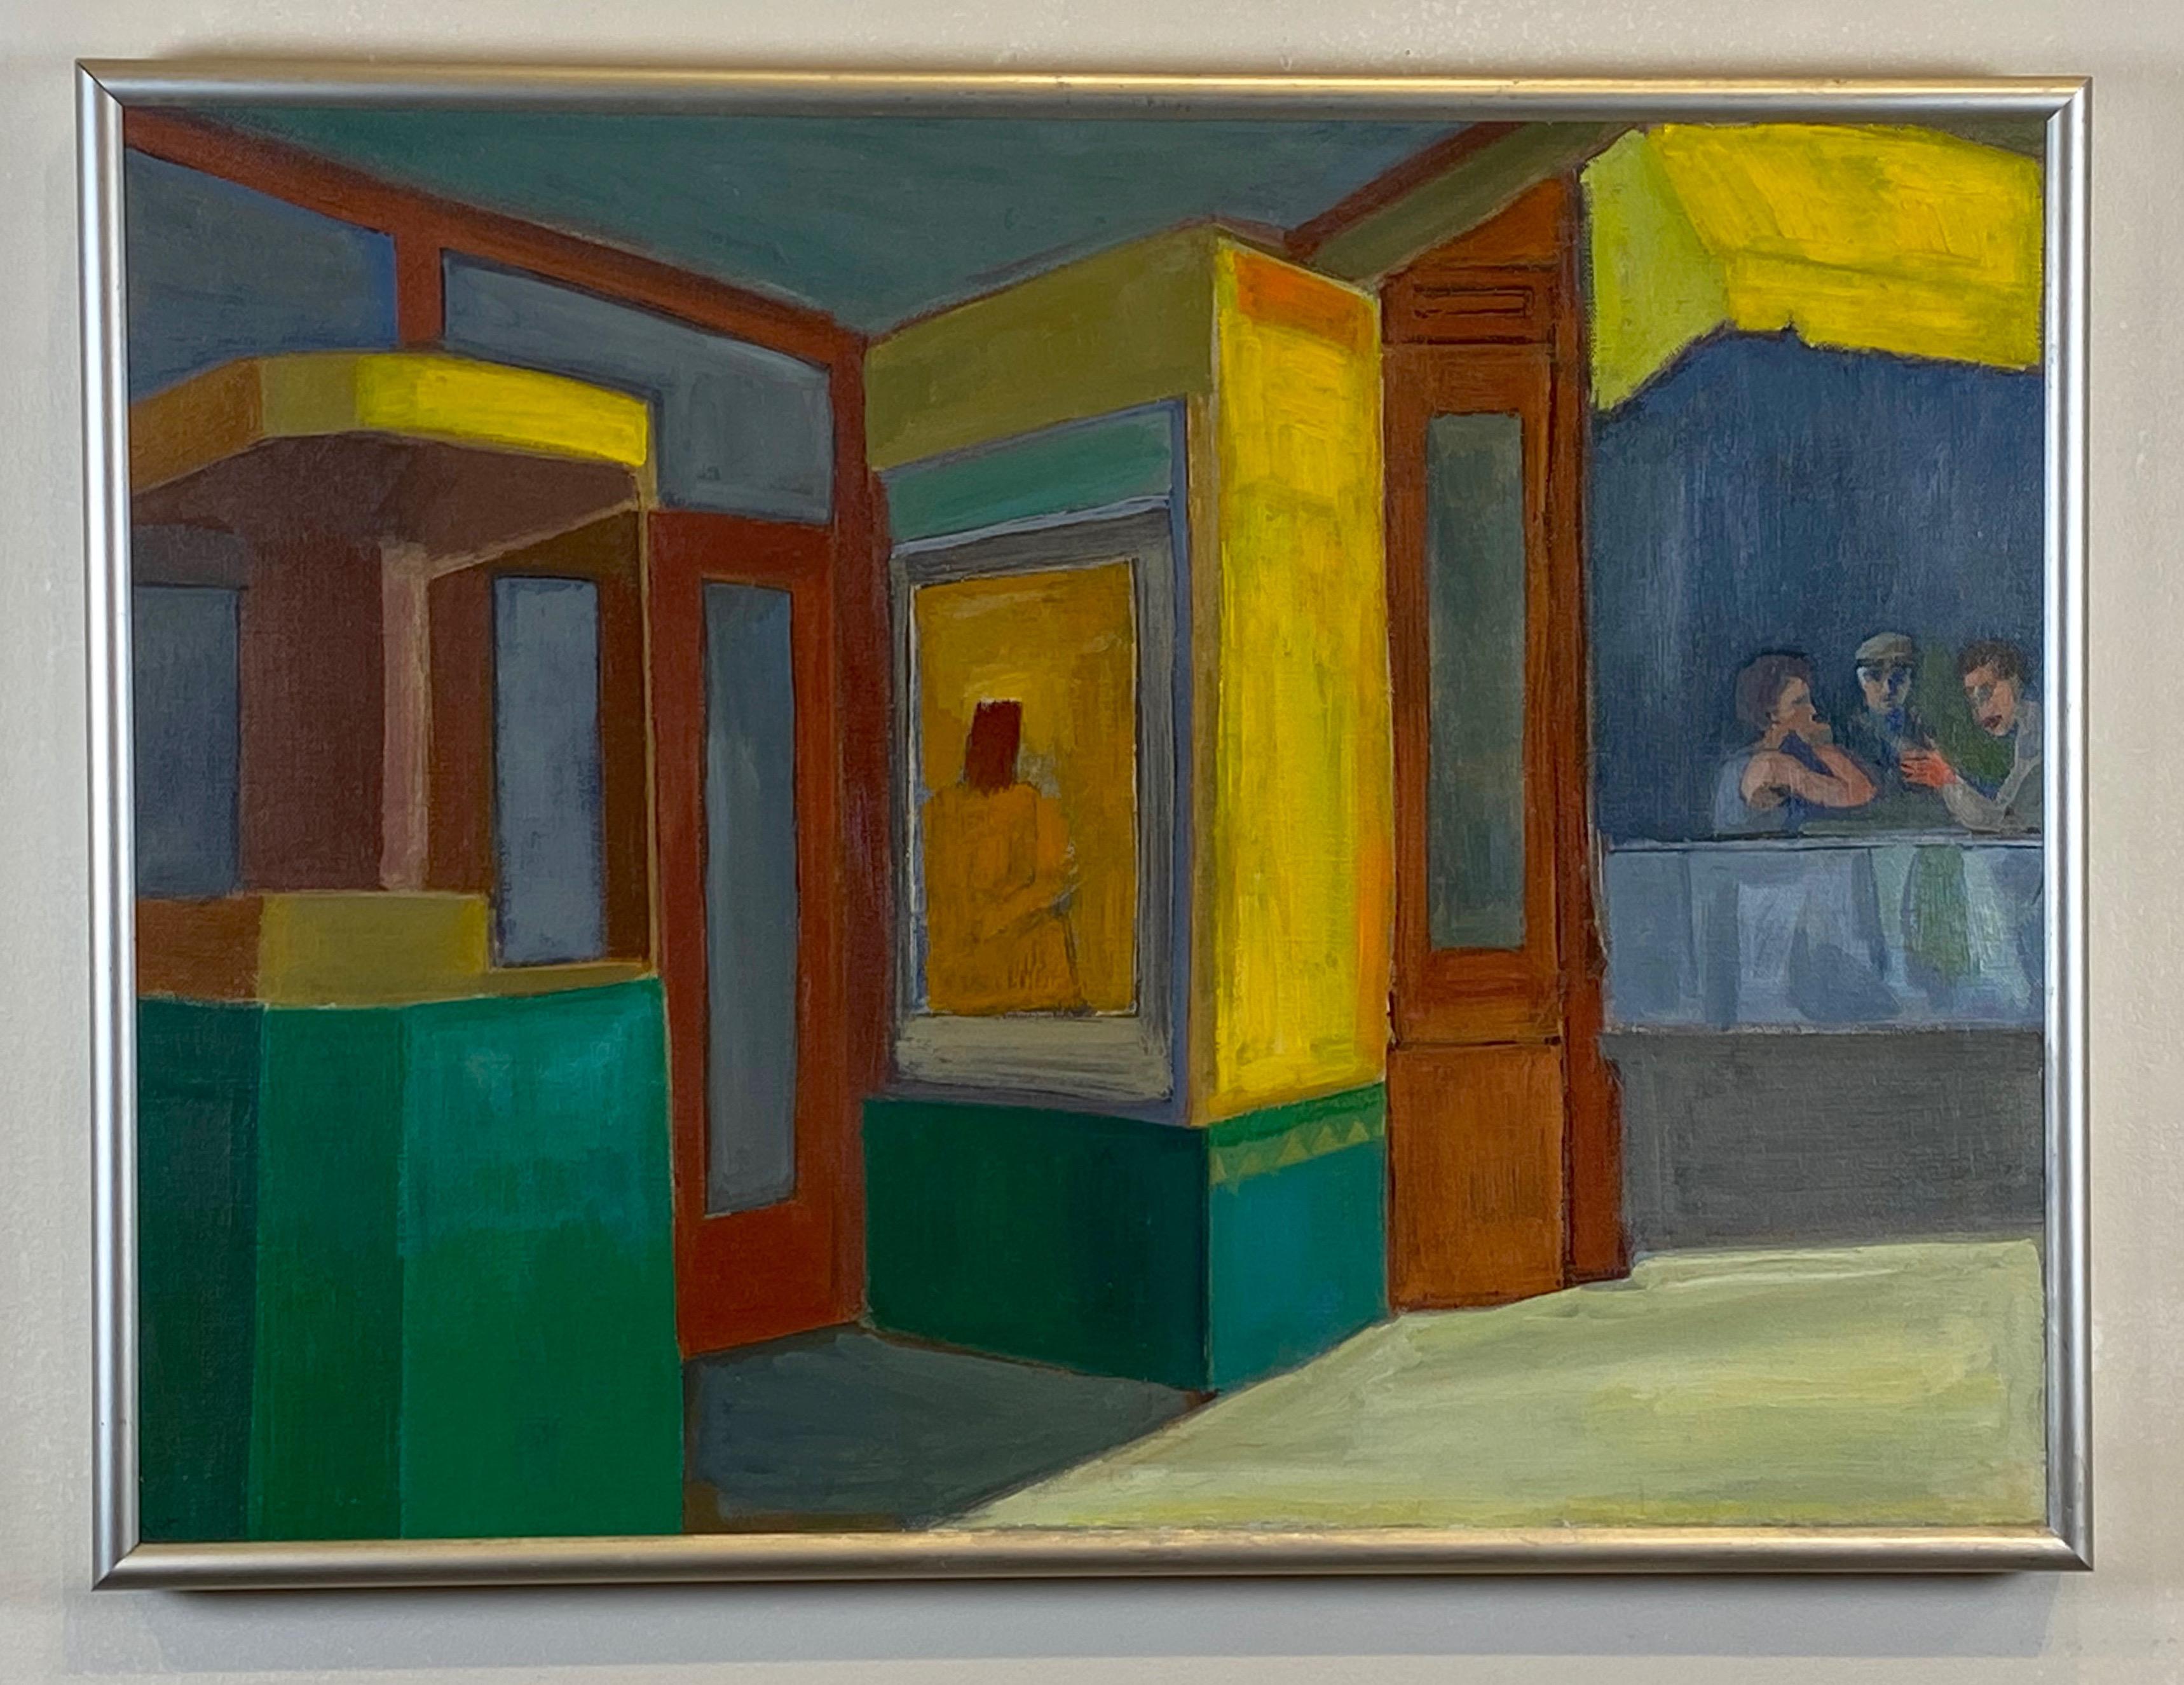 1960s Modernist painting on canvas that has the style elements and influences of Folk Art and American painter Edward Hopper, bright colors and minimalist forms with three figures in the right corner of the frame, the image consists of the front of